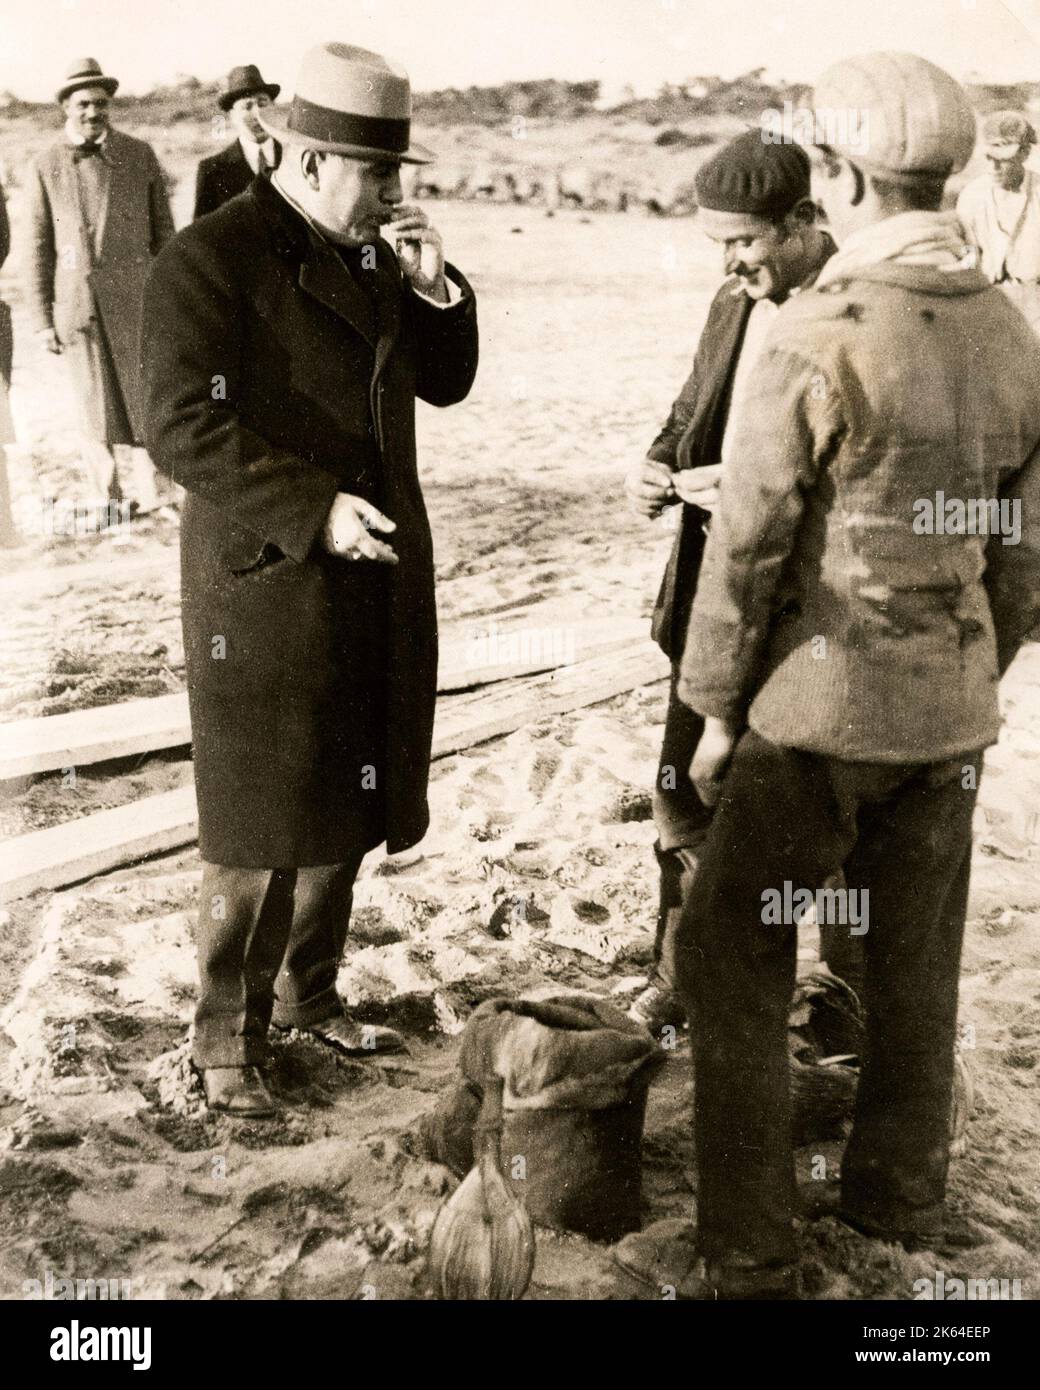 Early 20th century vintage press photograph - Italian fascist leader Benito Mussolini eating mussels while visting fishermen in Ostia, Rome, c.1920s Stock Photo